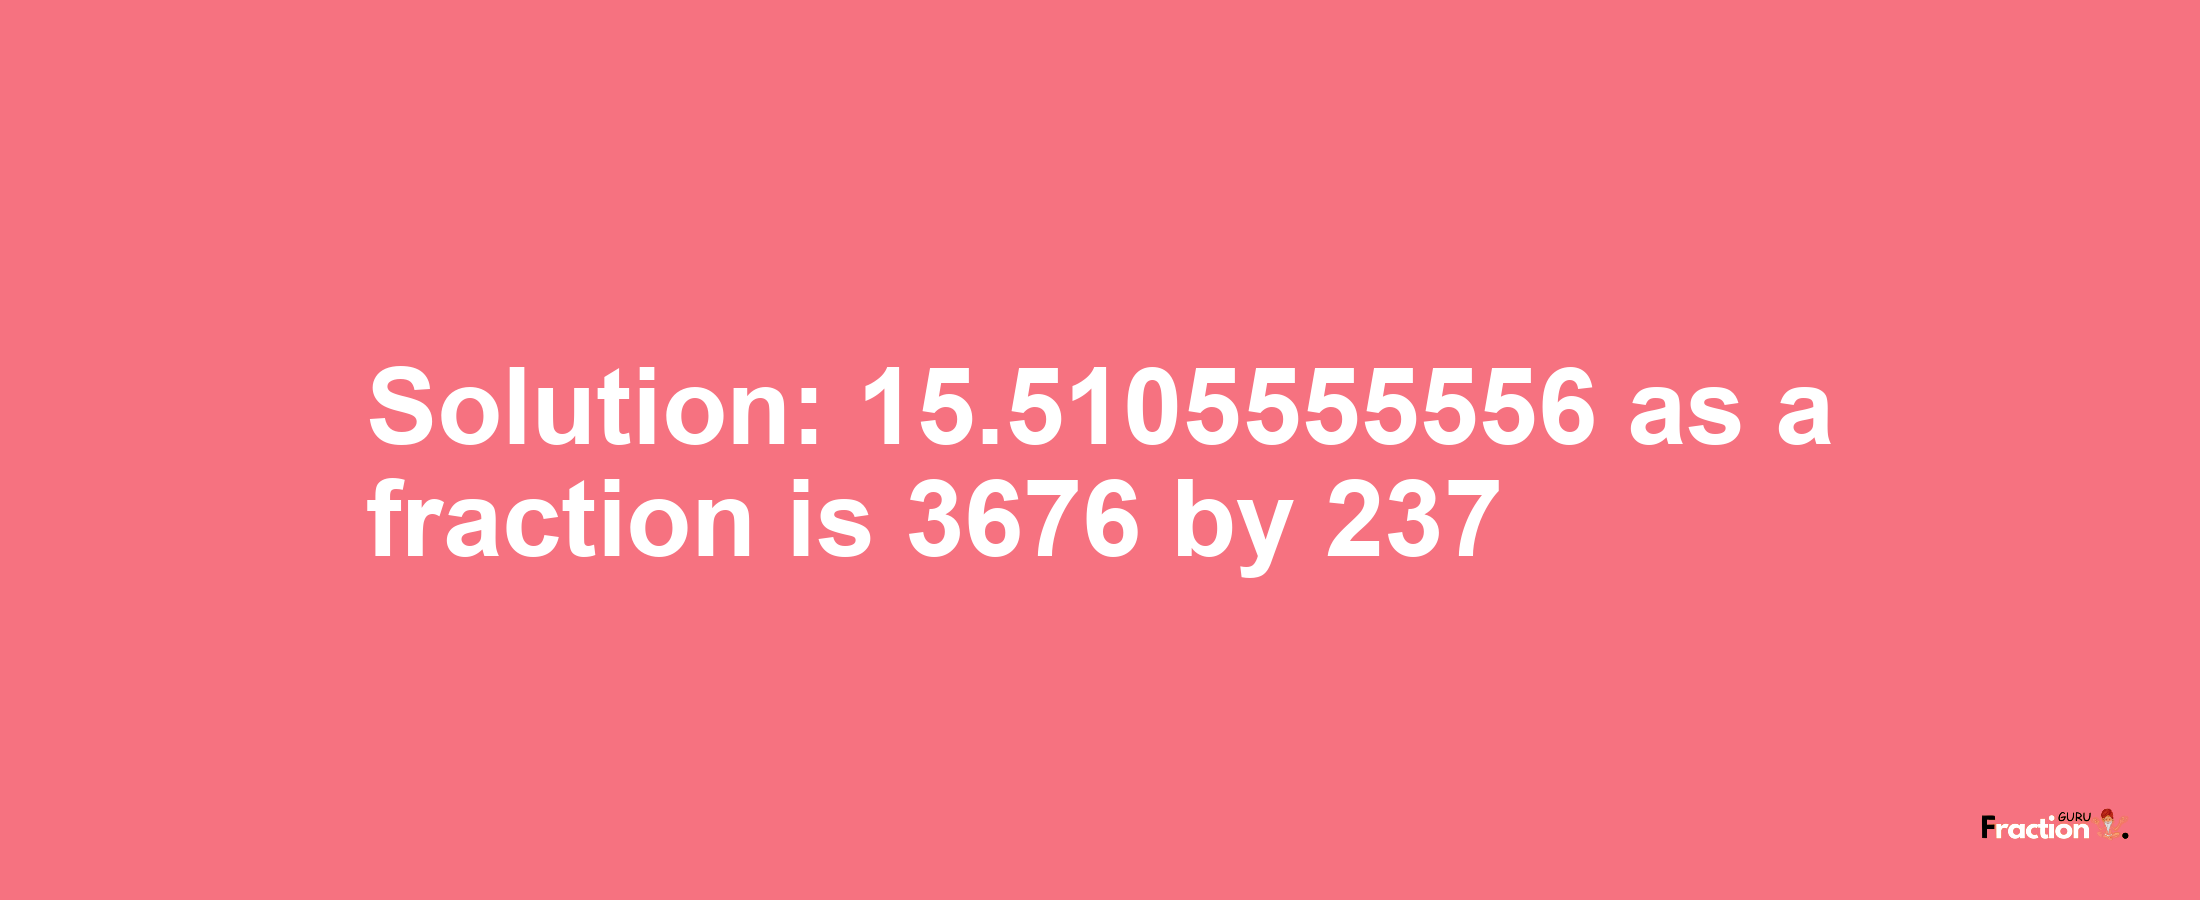 Solution:15.5105555556 as a fraction is 3676/237